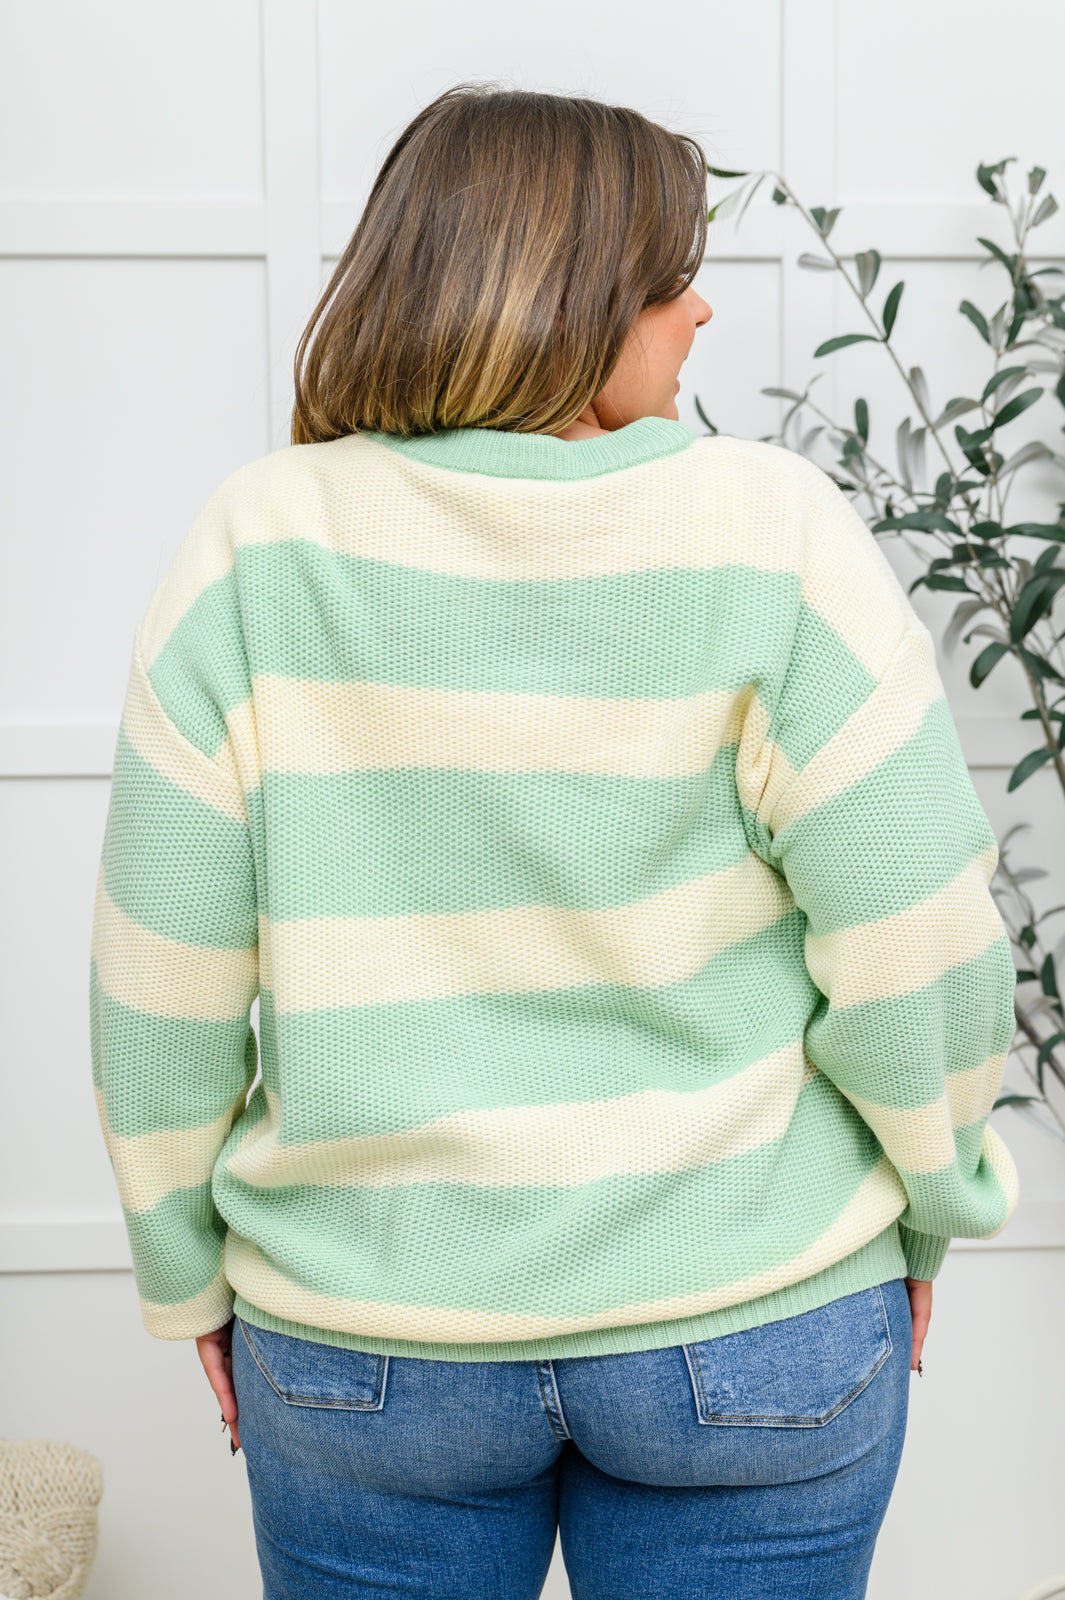 Striped Top In Sage (Online Exclusive)